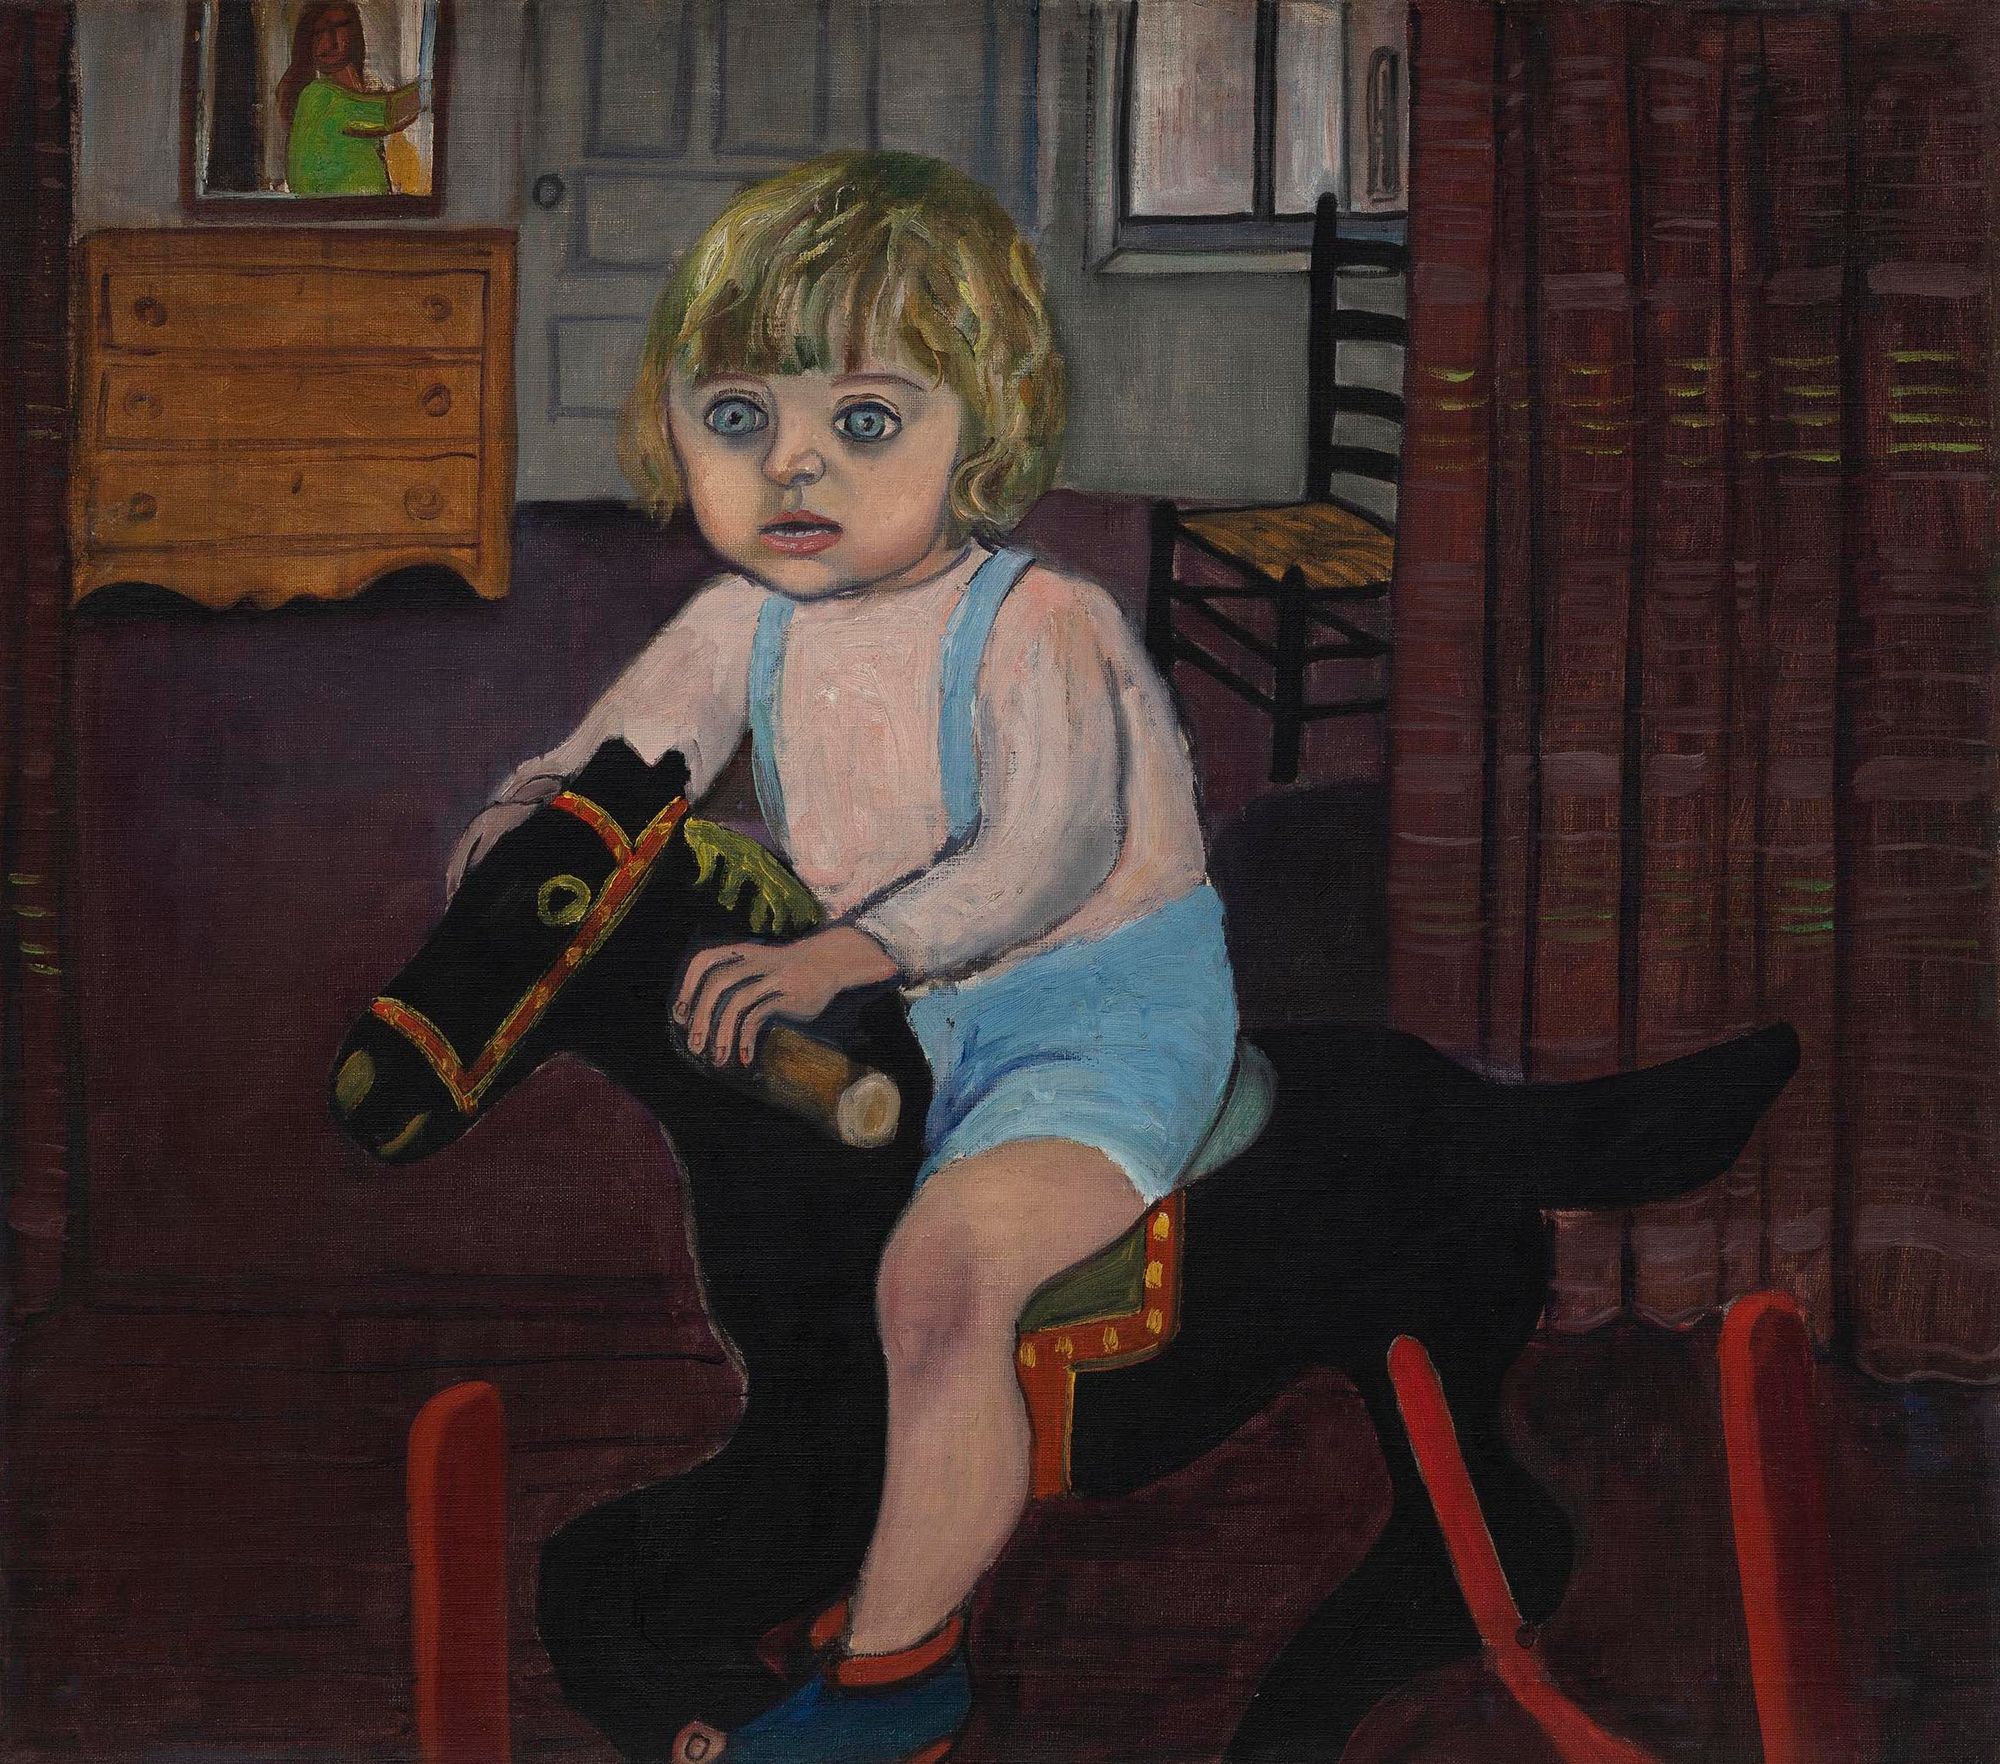 A child with wide, almost fearful eyes rocks on a rocking horse.